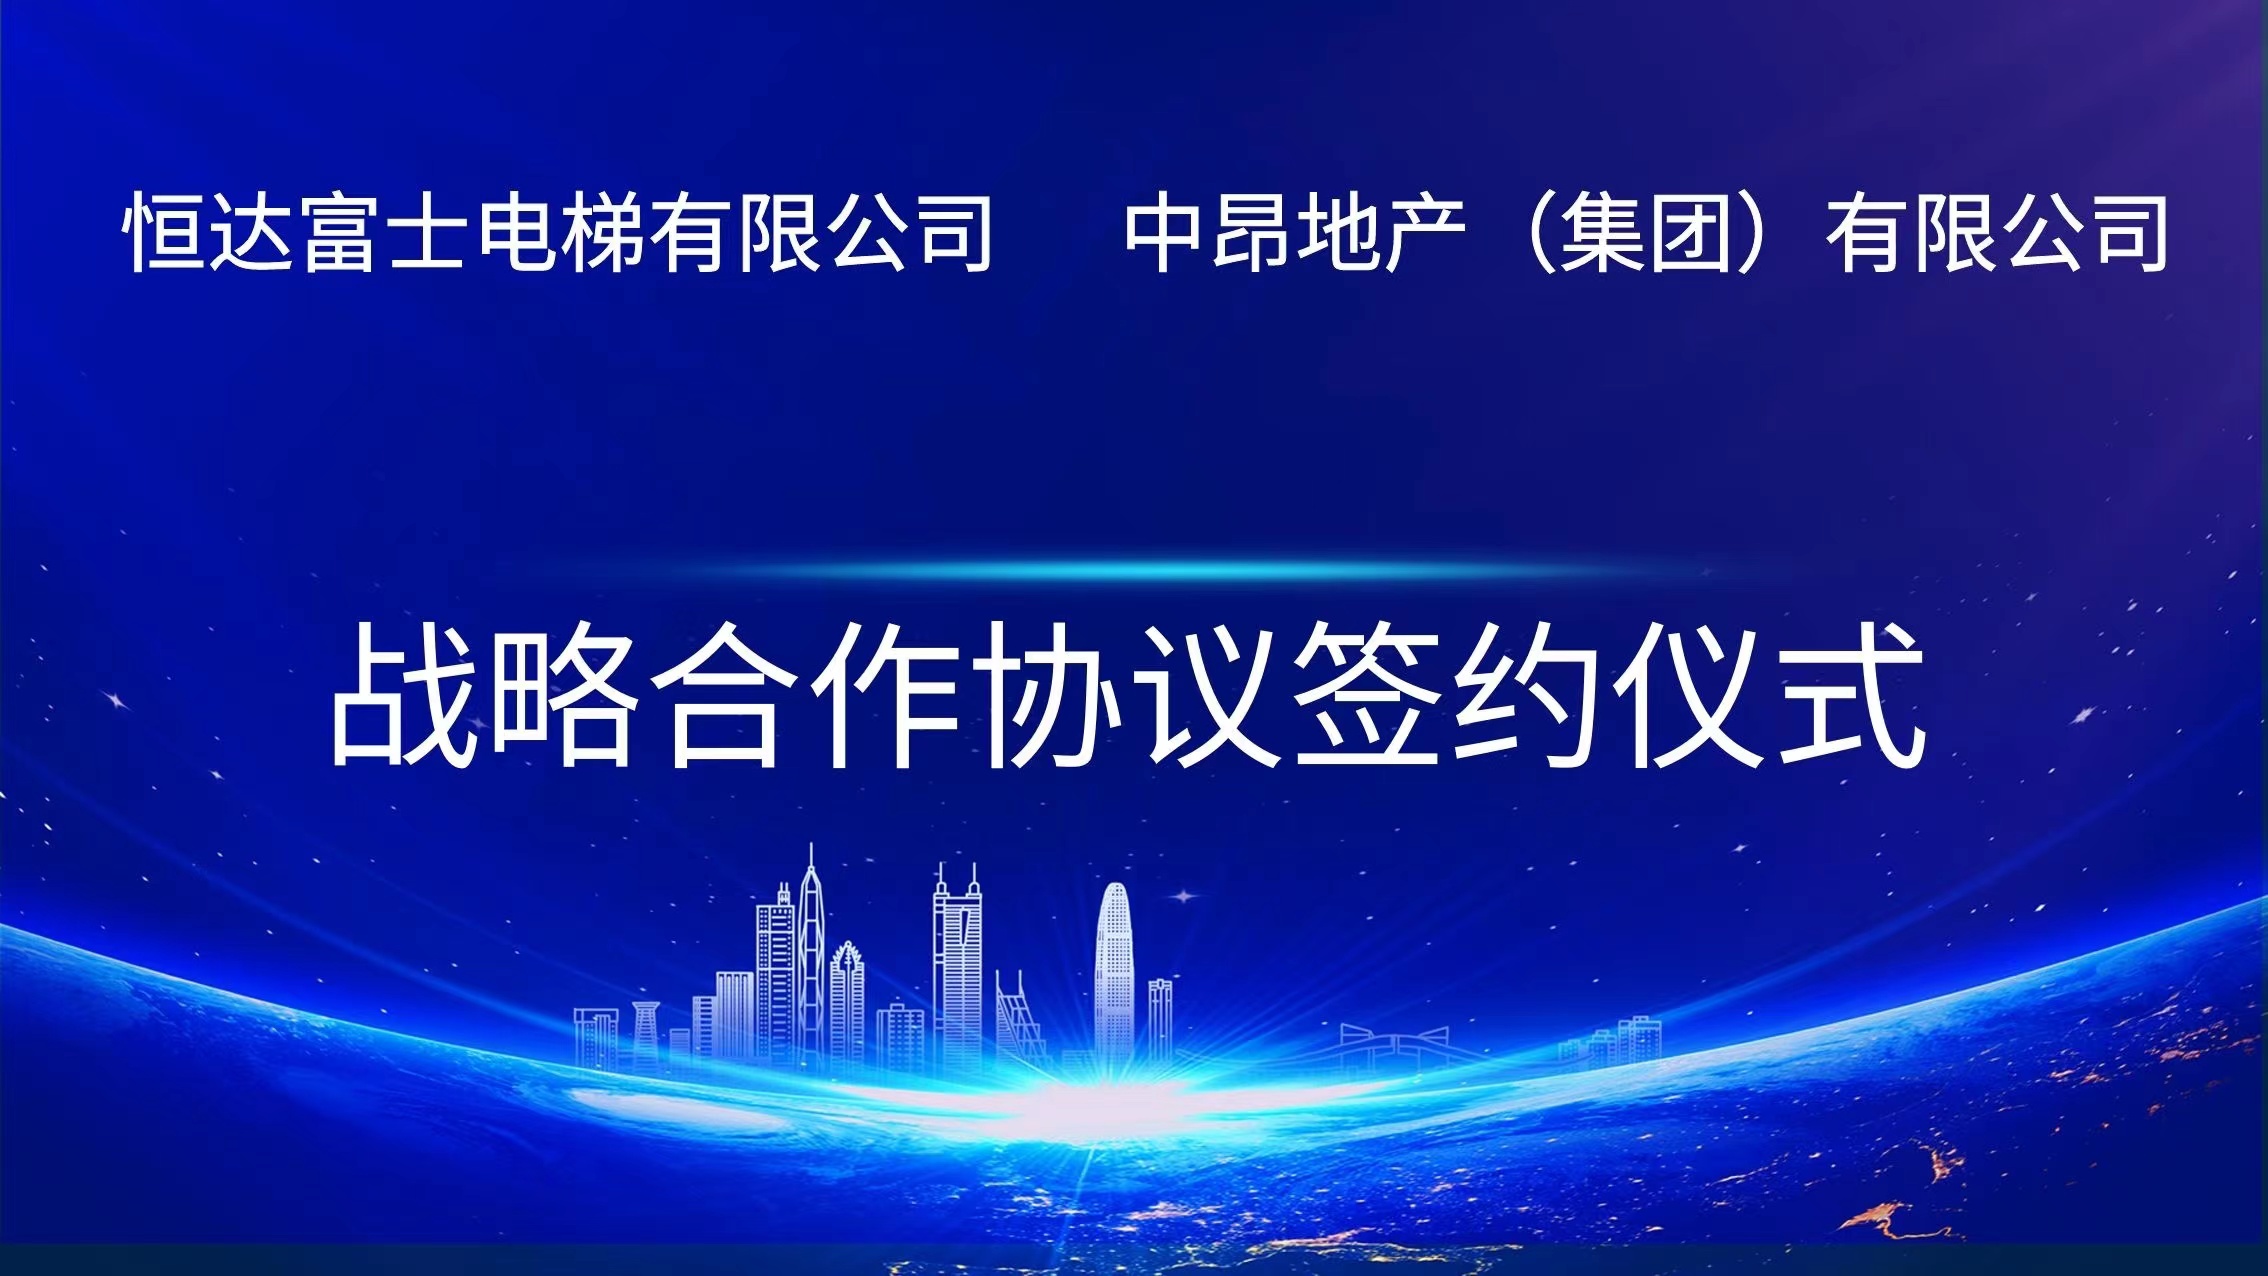 asiagame(中国游)asiagaming